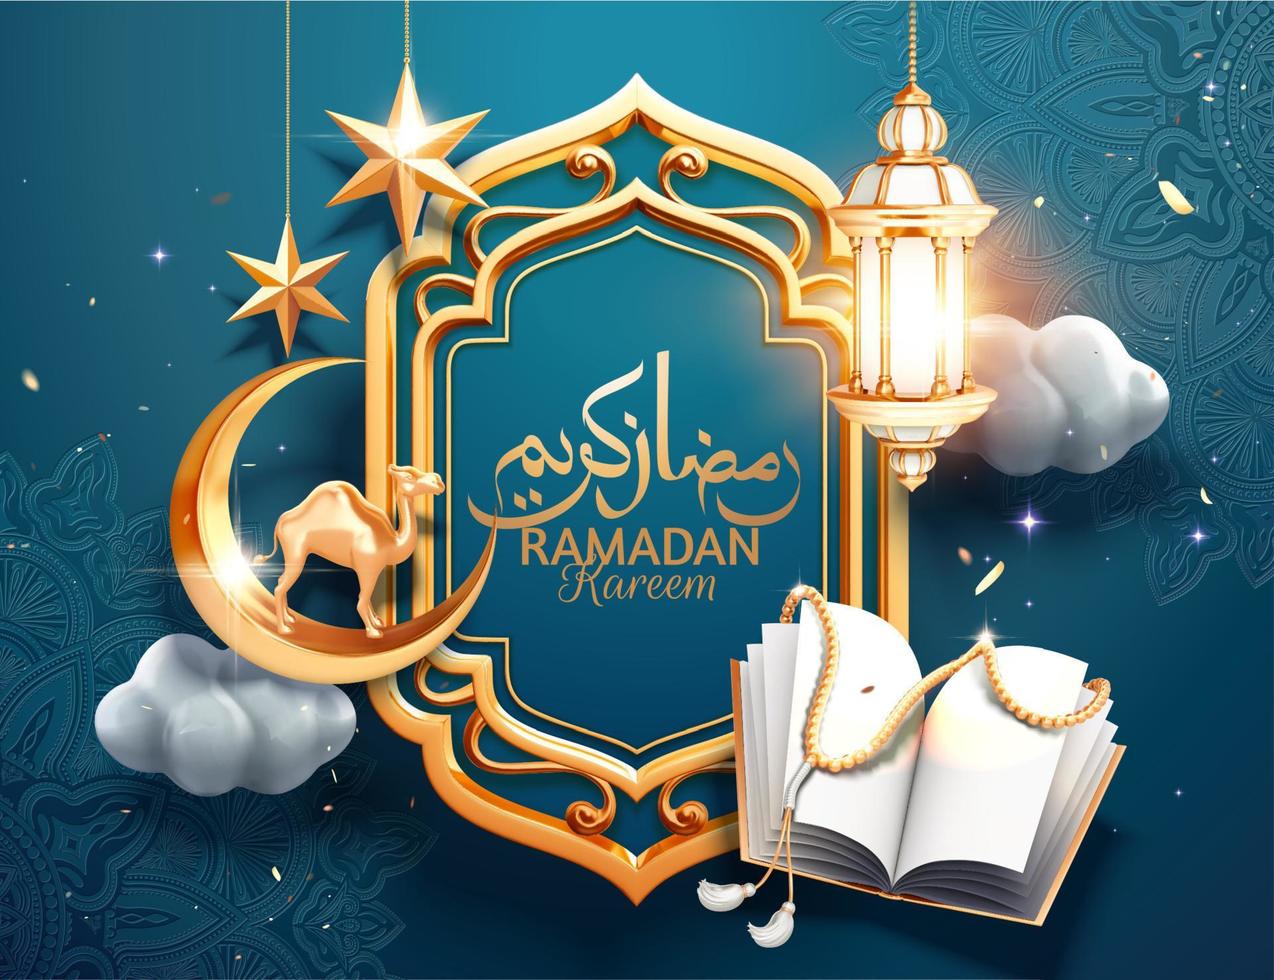 3d greeting arabesque blue background with hanging lanterns, holy book quran and crescent, Arabic calligraphy text Ramadan Kareem for holy month vector